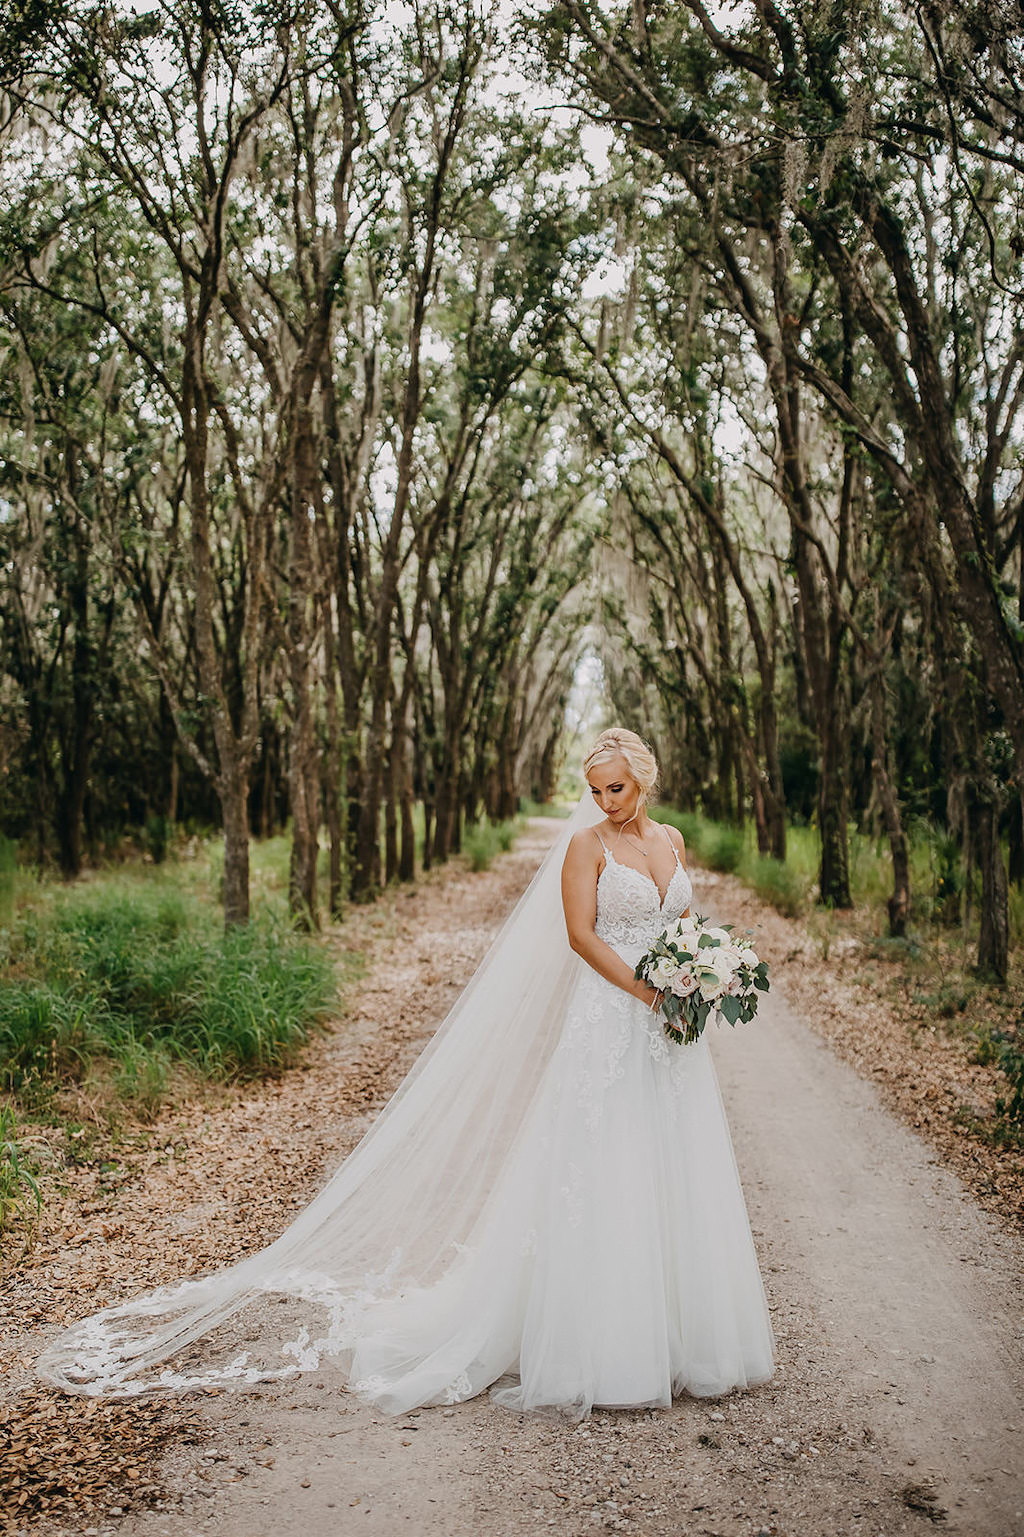 Florida Outdoor Rustic Bride Wedding Portrait, Bride in Spaghetti Strap V Neck Lace A line Wedding Dress with Greenery and White Floral Bouquet